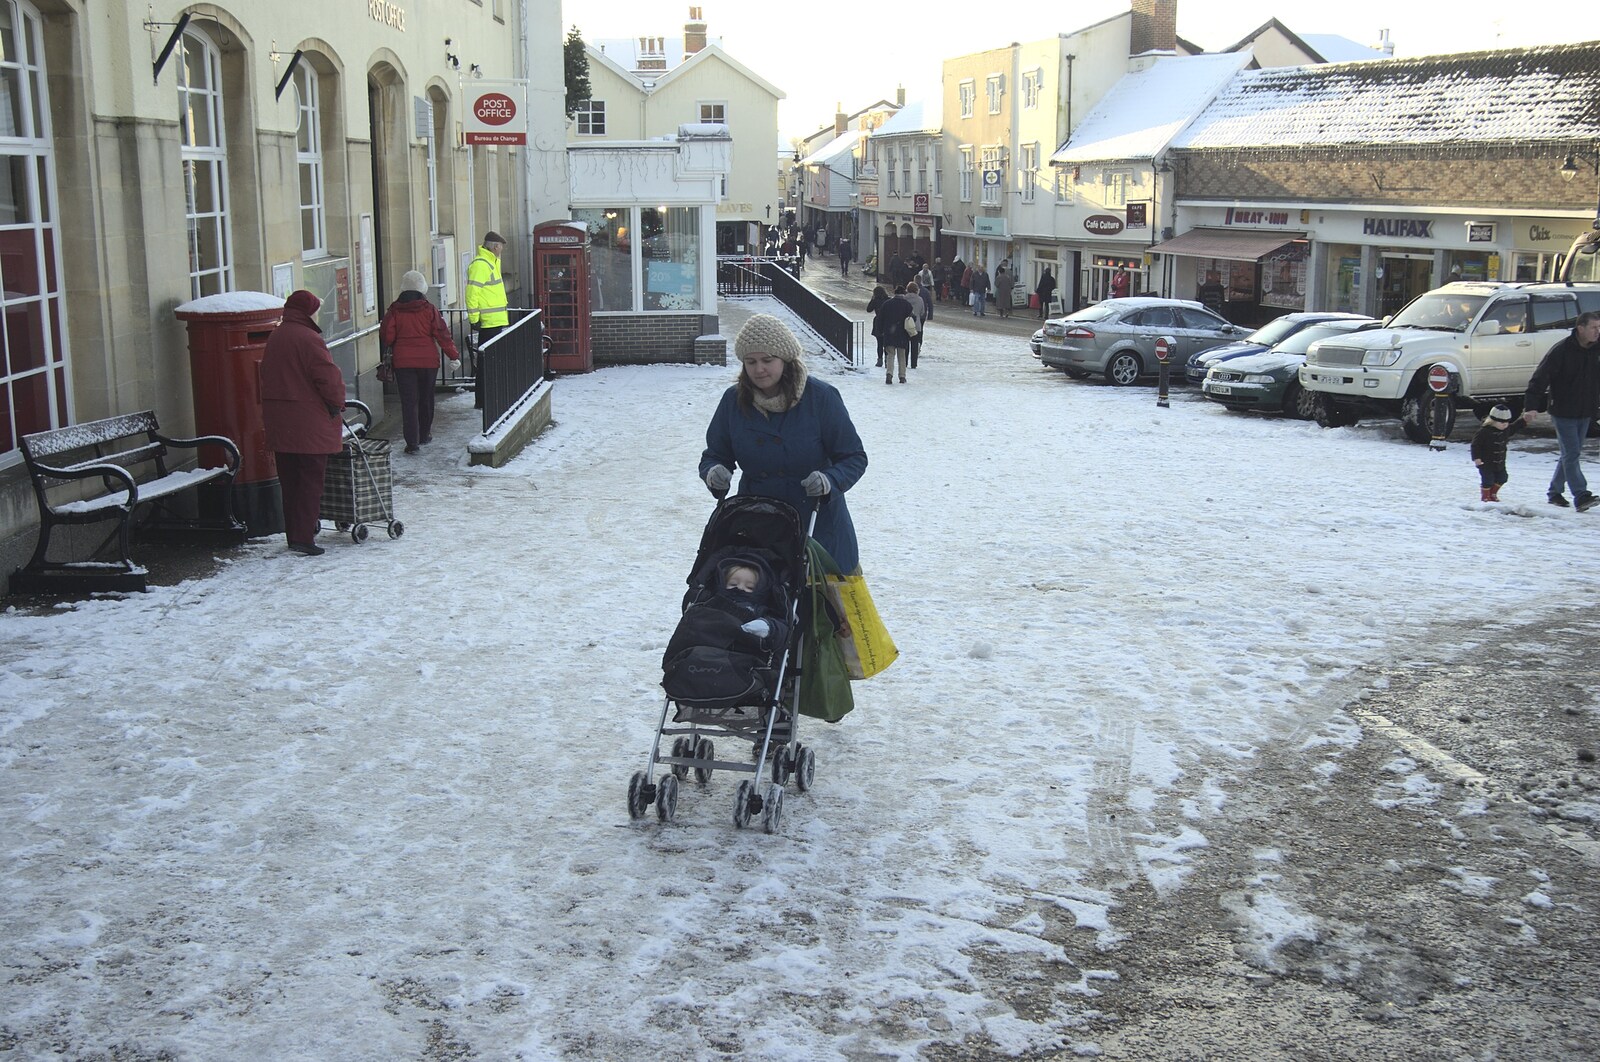 Isobel struggles up the market place in Diss from Snow in Diss, Fred Walks, and The BBs Play a Wedding, Diss and Mendlesham - 18th December 2009